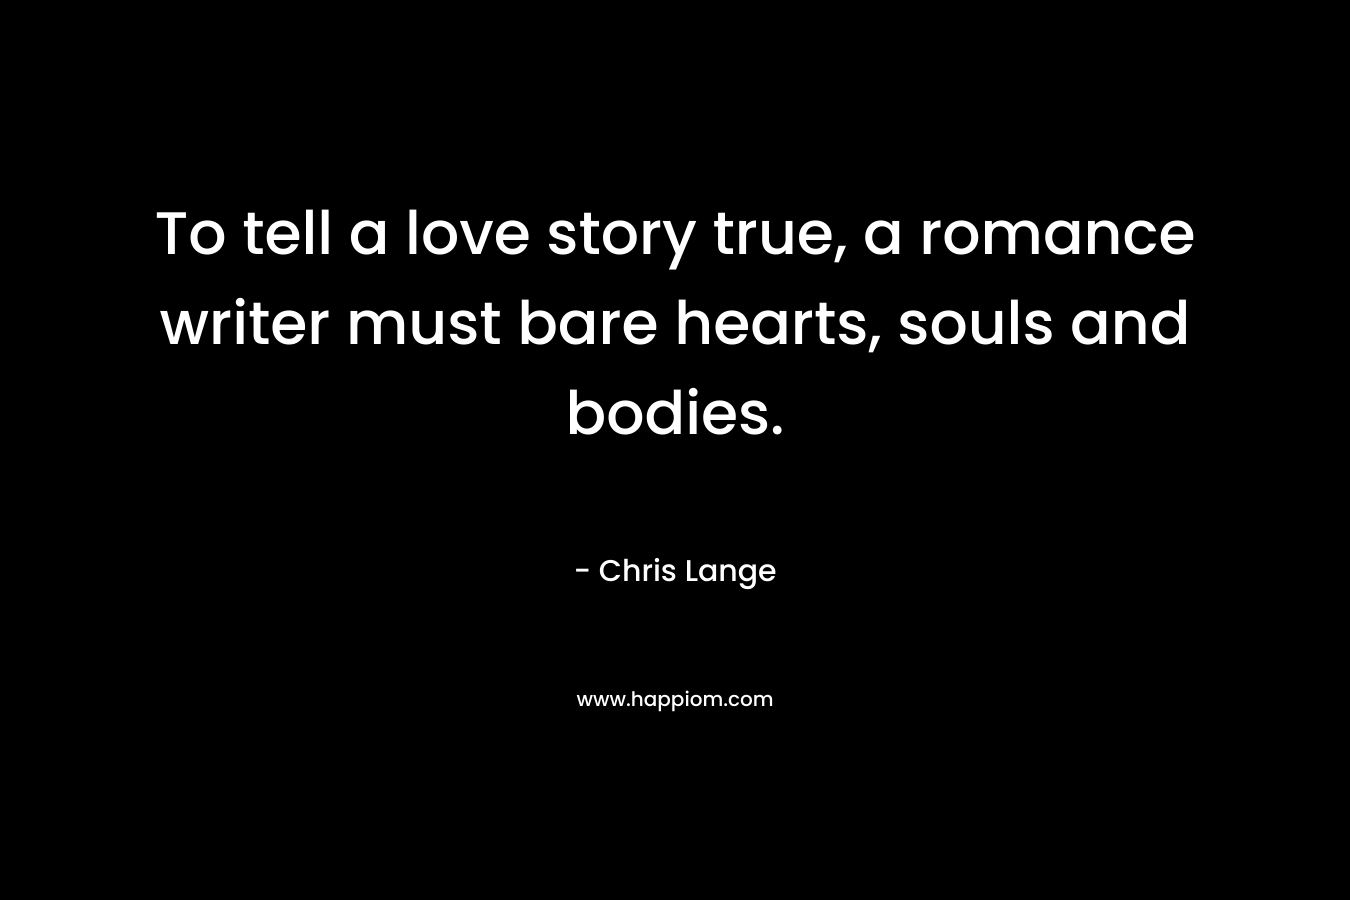 To tell a love story true, a romance writer must bare hearts, souls and bodies.